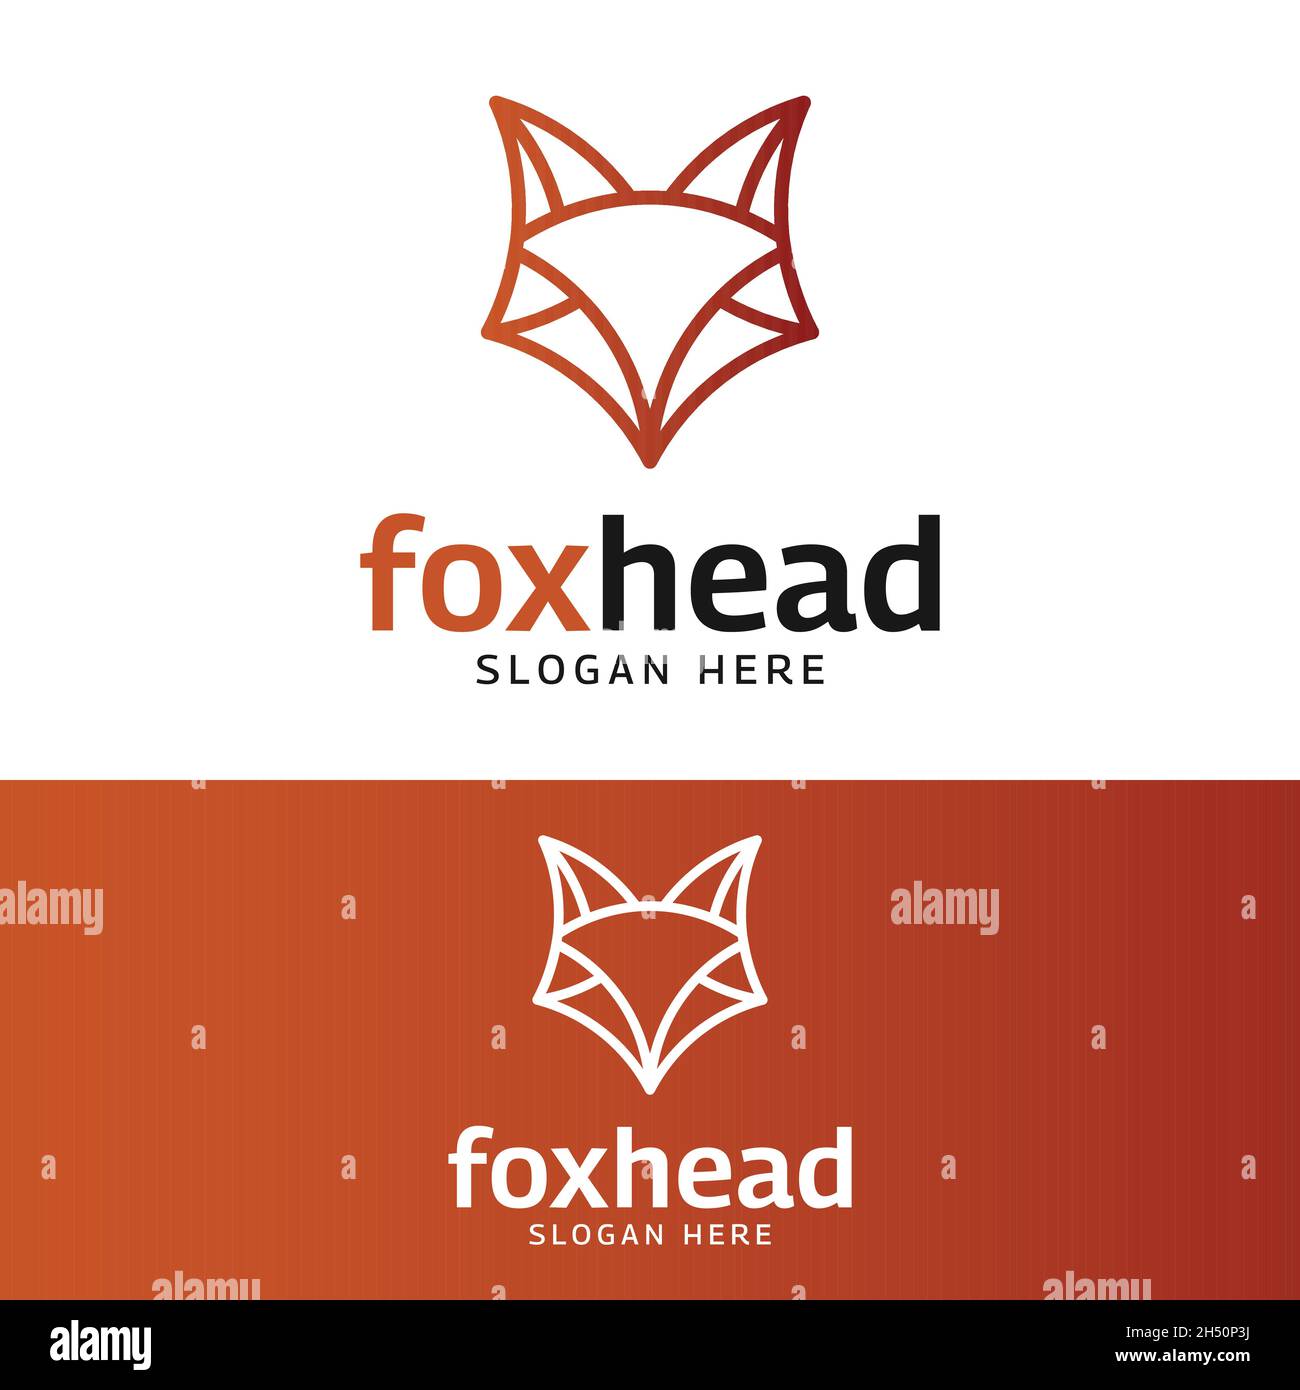 Simple Fox Head in Orange Line Style Logo Design Template. Suitable to be used as a mascot for digital applications, brands, or company logos. Stock Vector